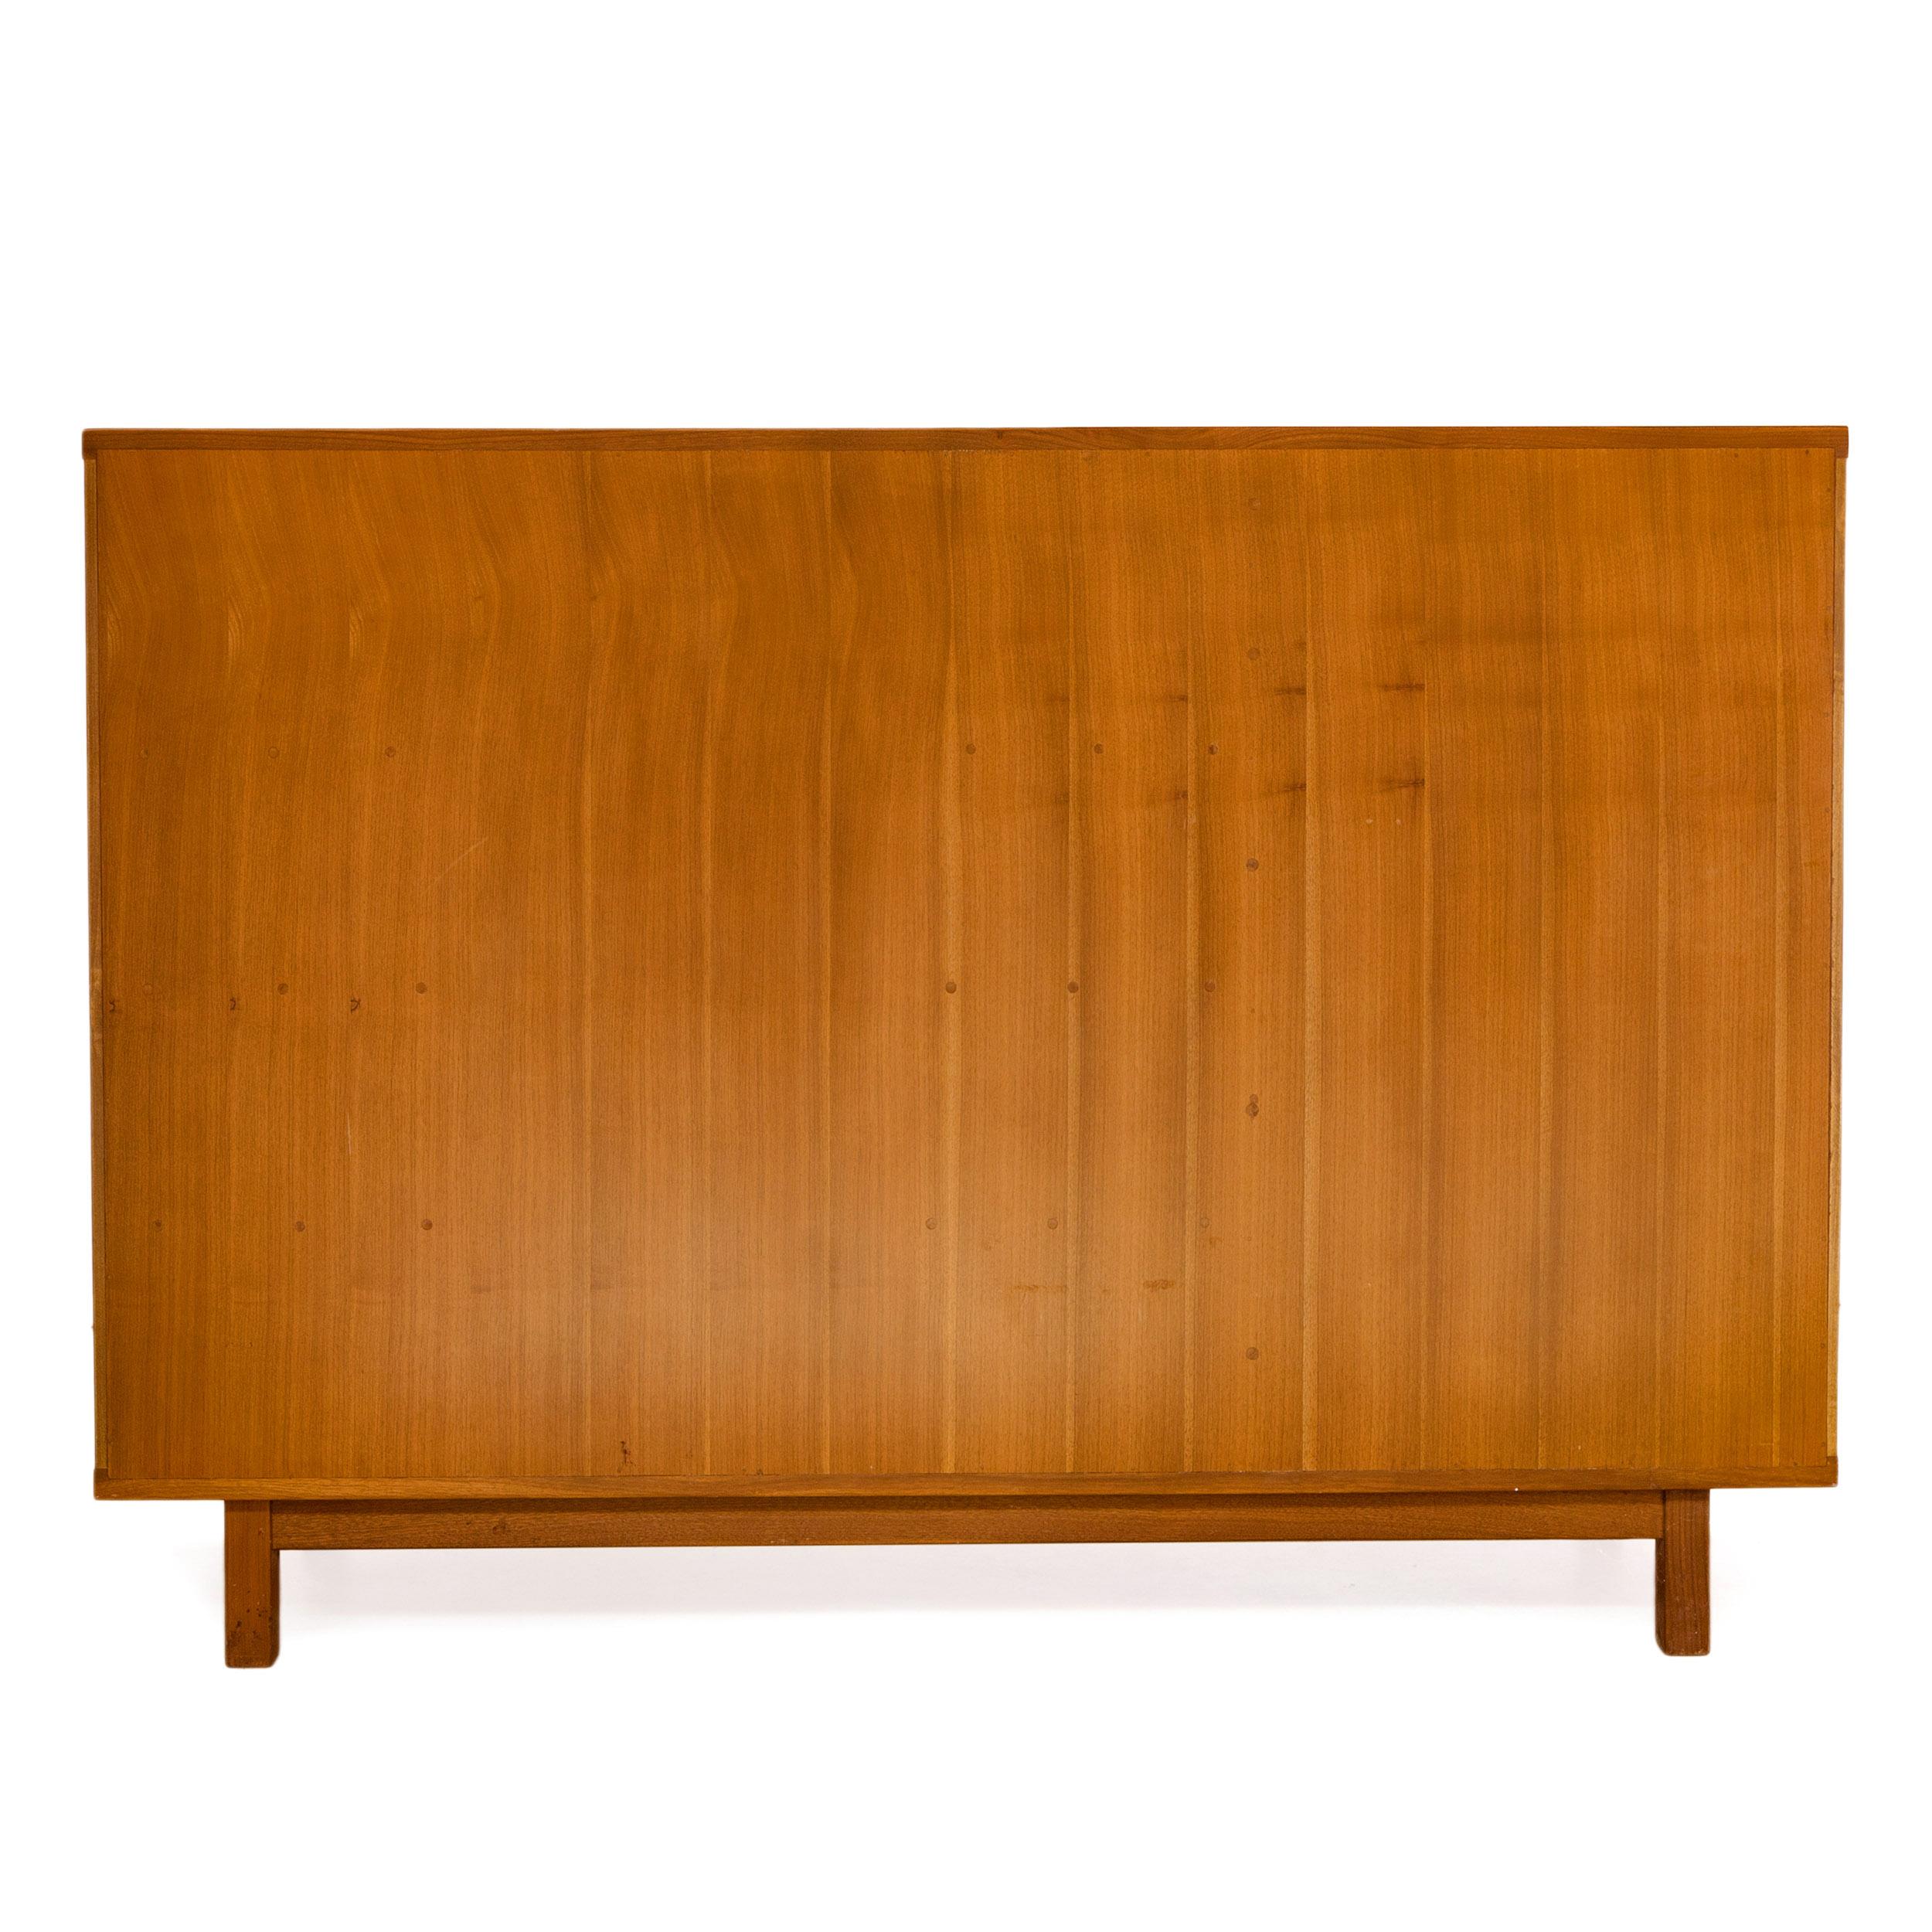 1950s Solid Walnut Dresser by Edward Wormley for Dunbar In Good Condition For Sale In Sagaponack, NY